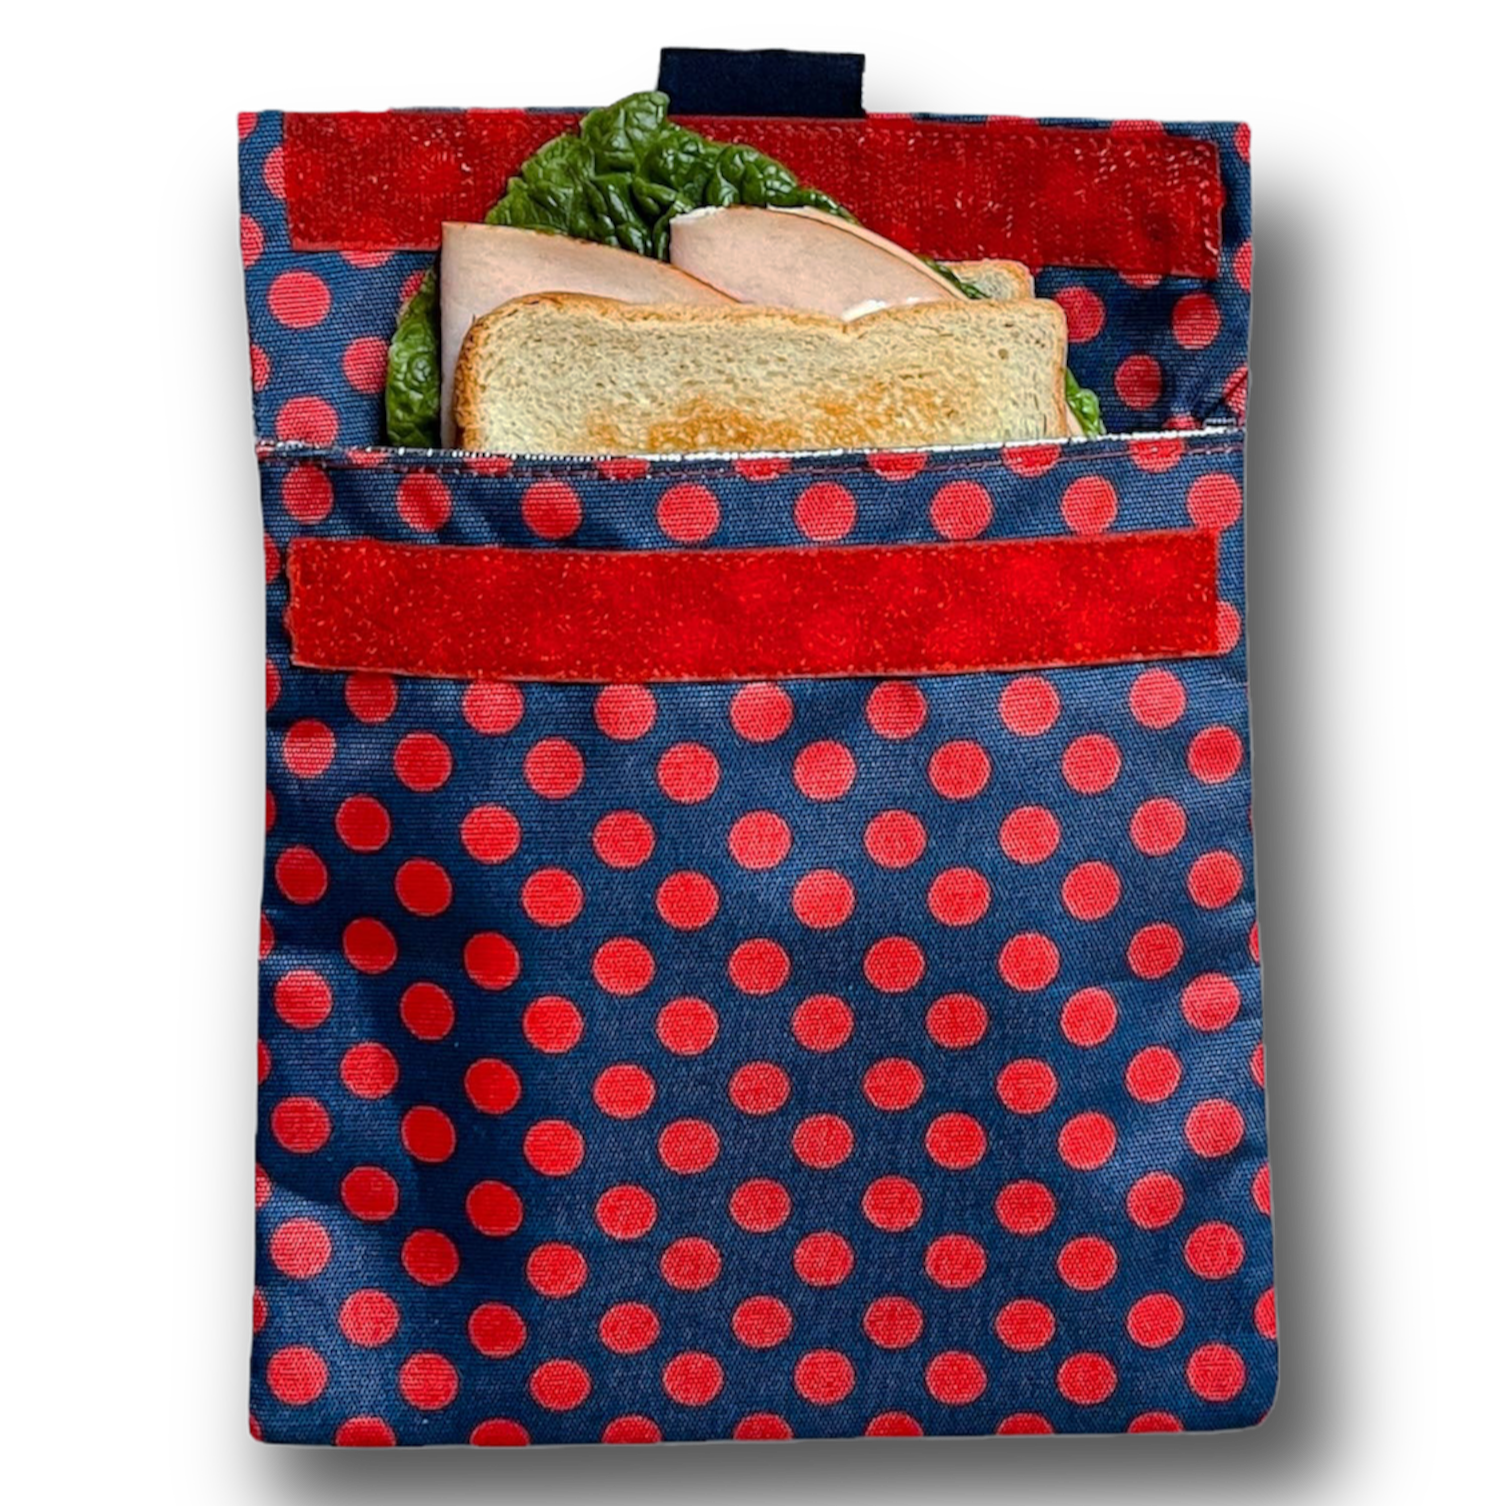 Patterned Reusable Snack and Sandwich Bags, Set of 4, Confetti